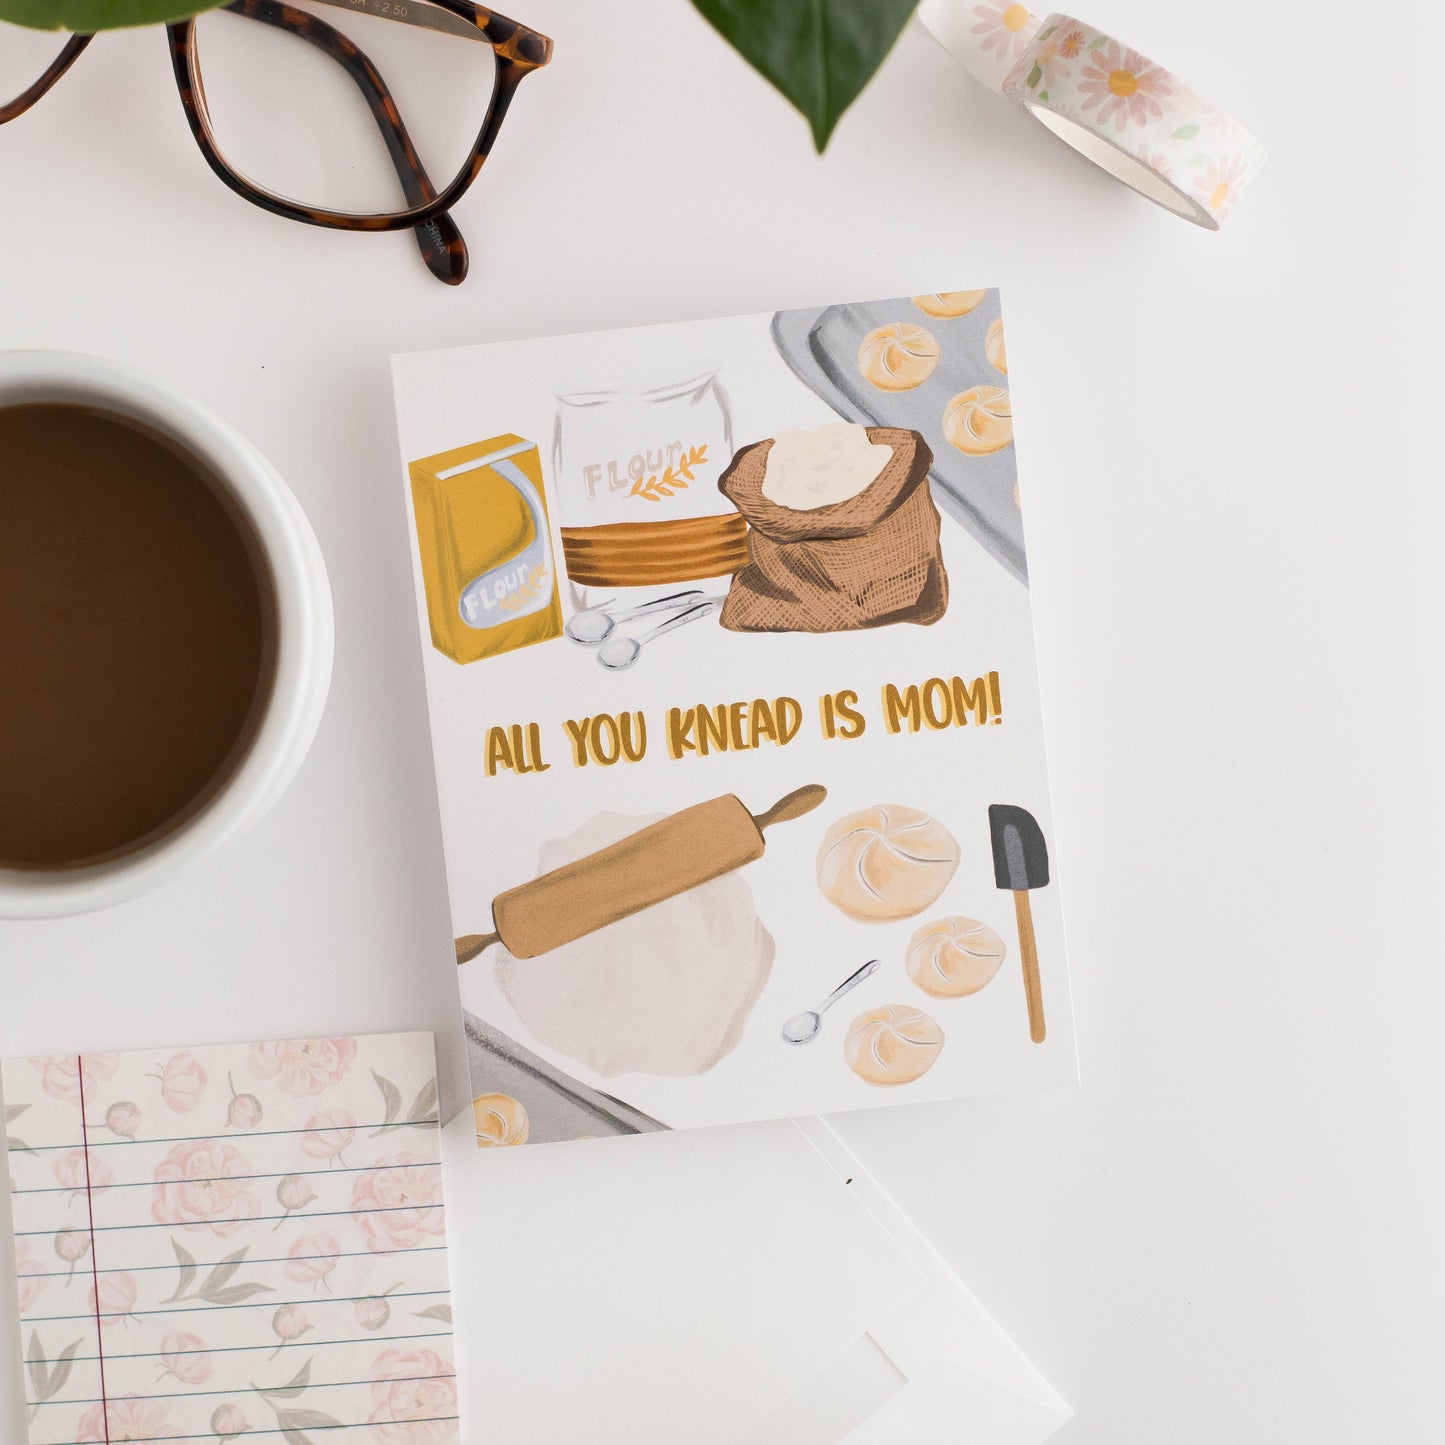 All You Knead Is Mom! - Greeting Card